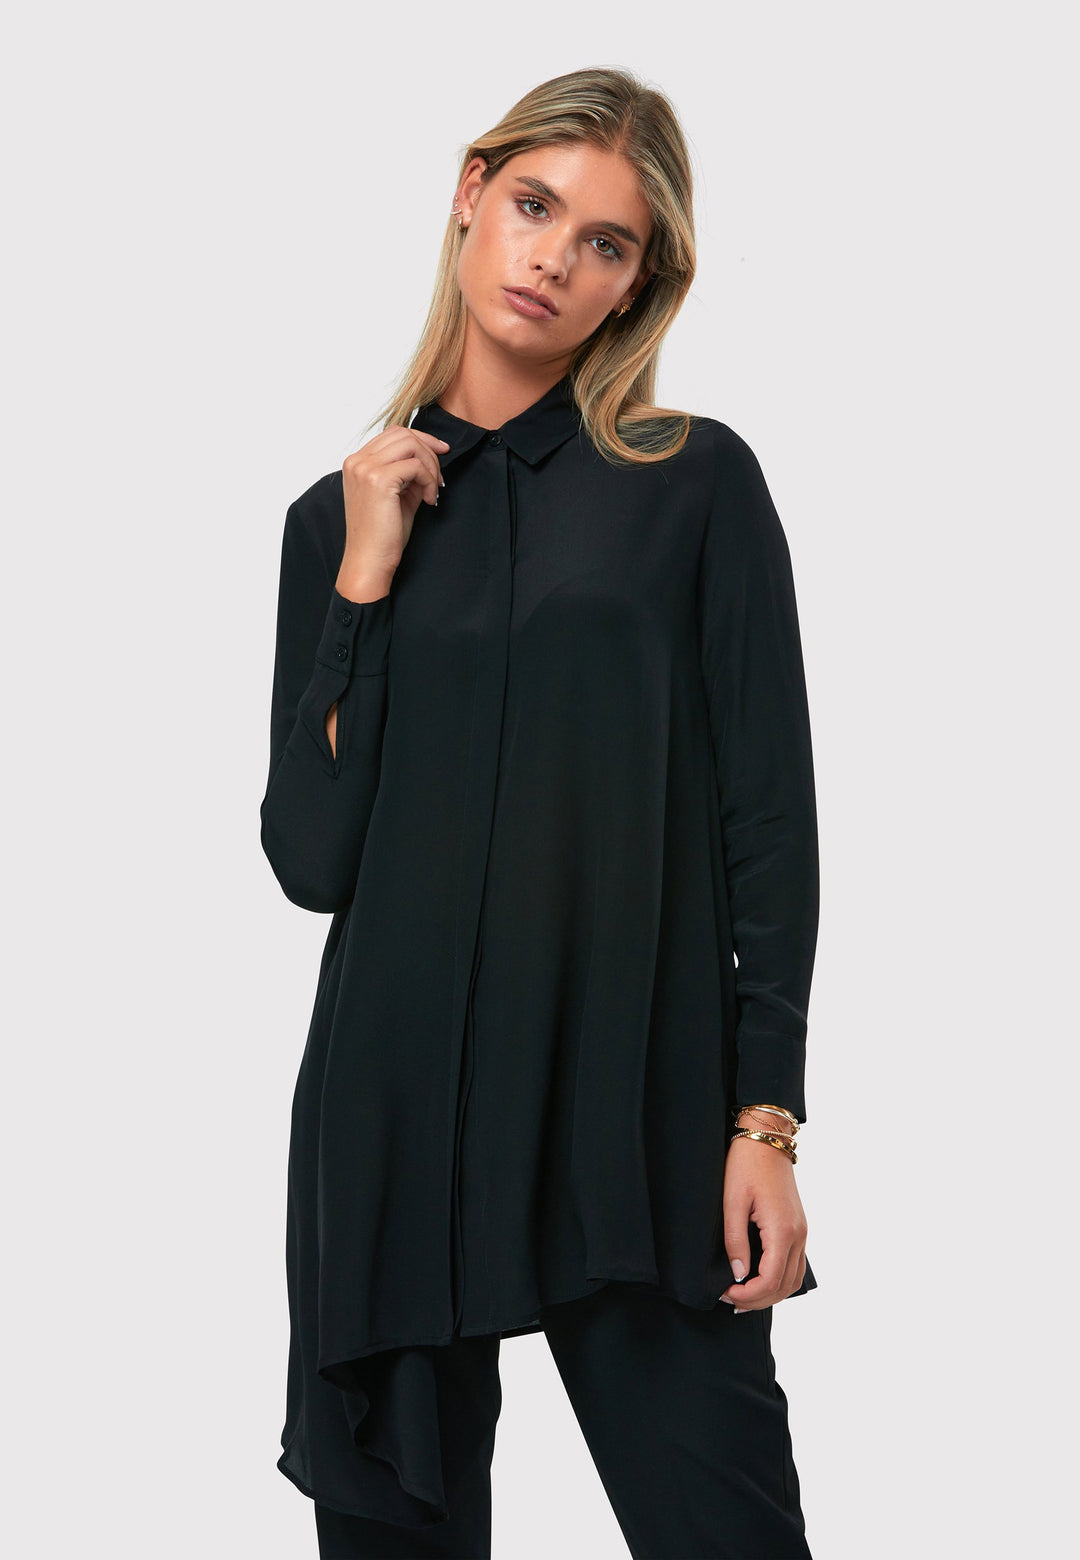 Introducing the Piper Black Silk Shirt, a timeless and versatile piece that exudes effortless sophistication. Crafted from lightweight black silk, this shirt features an asymmetrical hem for a modern twist. The full-length sleeves with cuffs add a touch of refinement. The button-down concealed placket enhances the sleek and polished look. Dress up a simple monochrome ensemble by pairing it with the Georgiana Narrow Leg Trousers in black. Embrace the elegance and versatility of the Piper Black Silk Shirt.